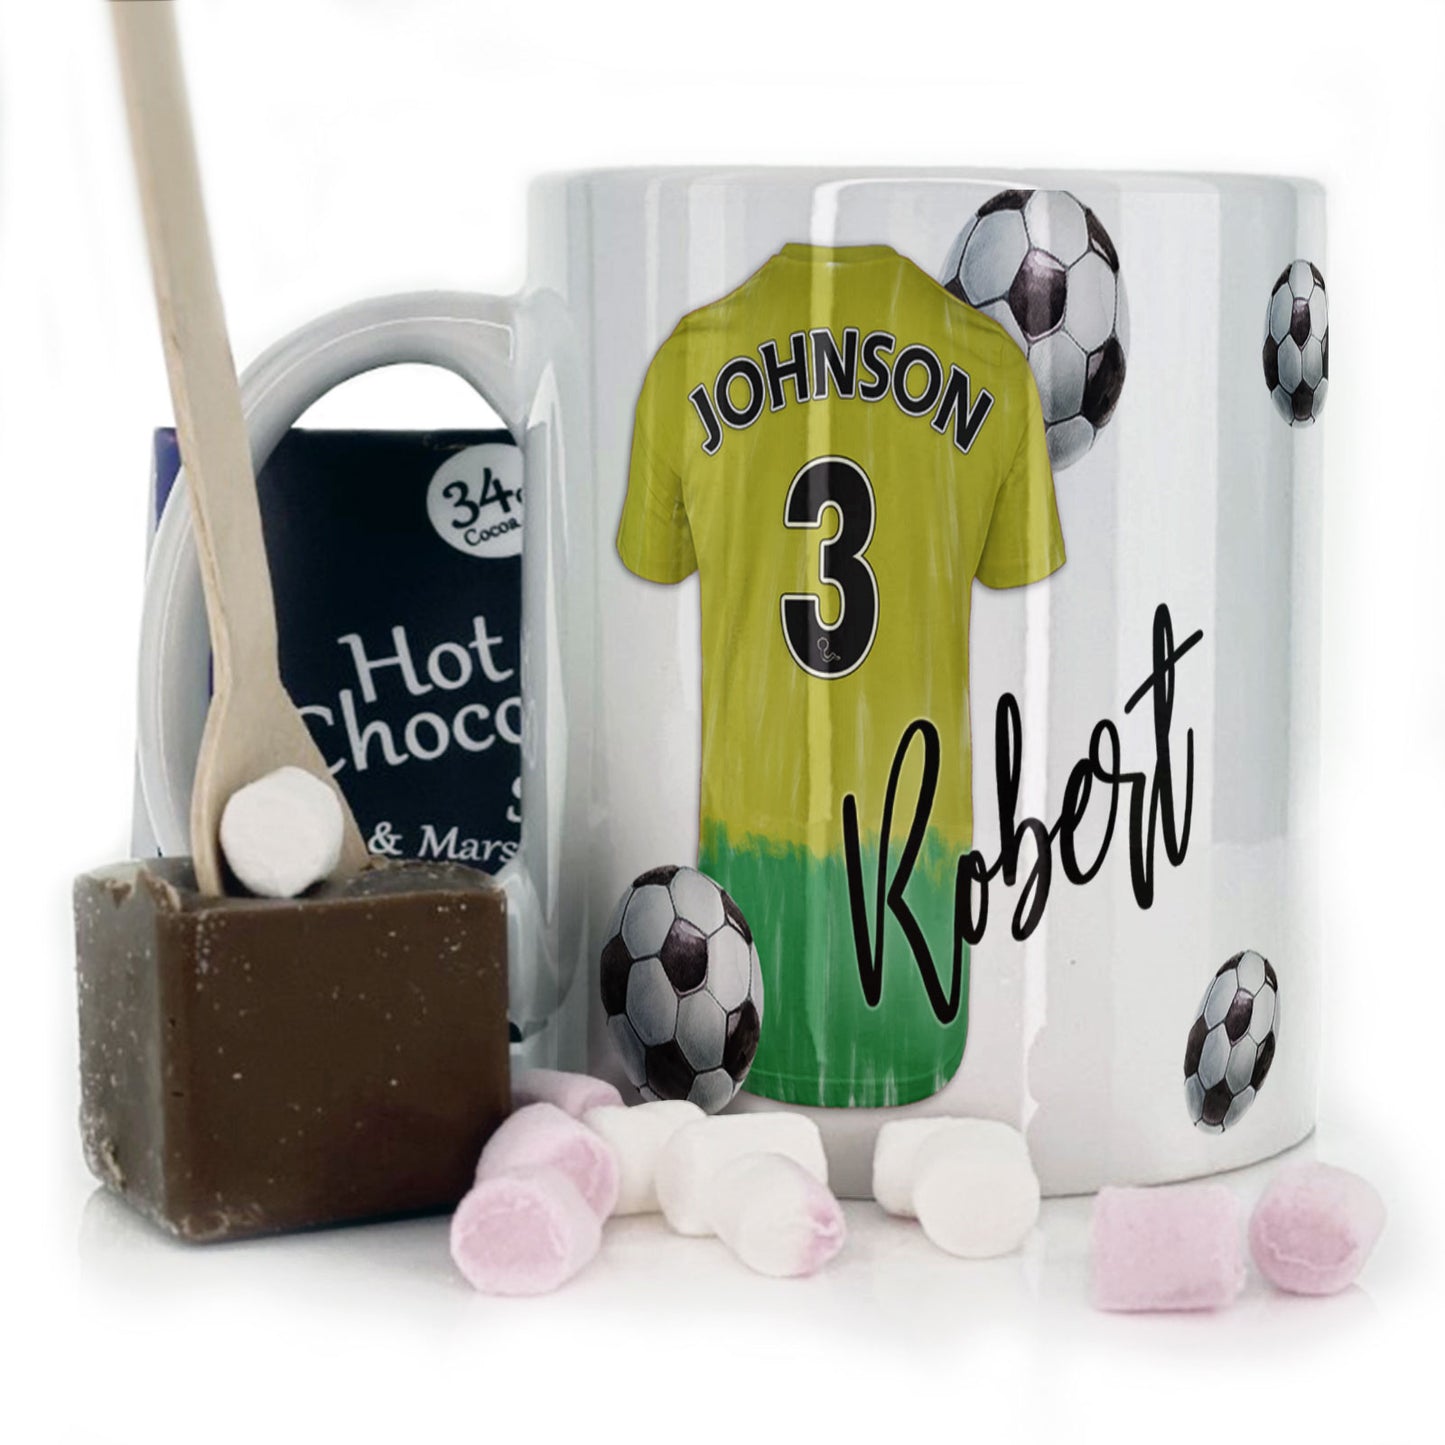 Personalised Mug with Stylish Text and Yellow & Green Shirt with Name & Number